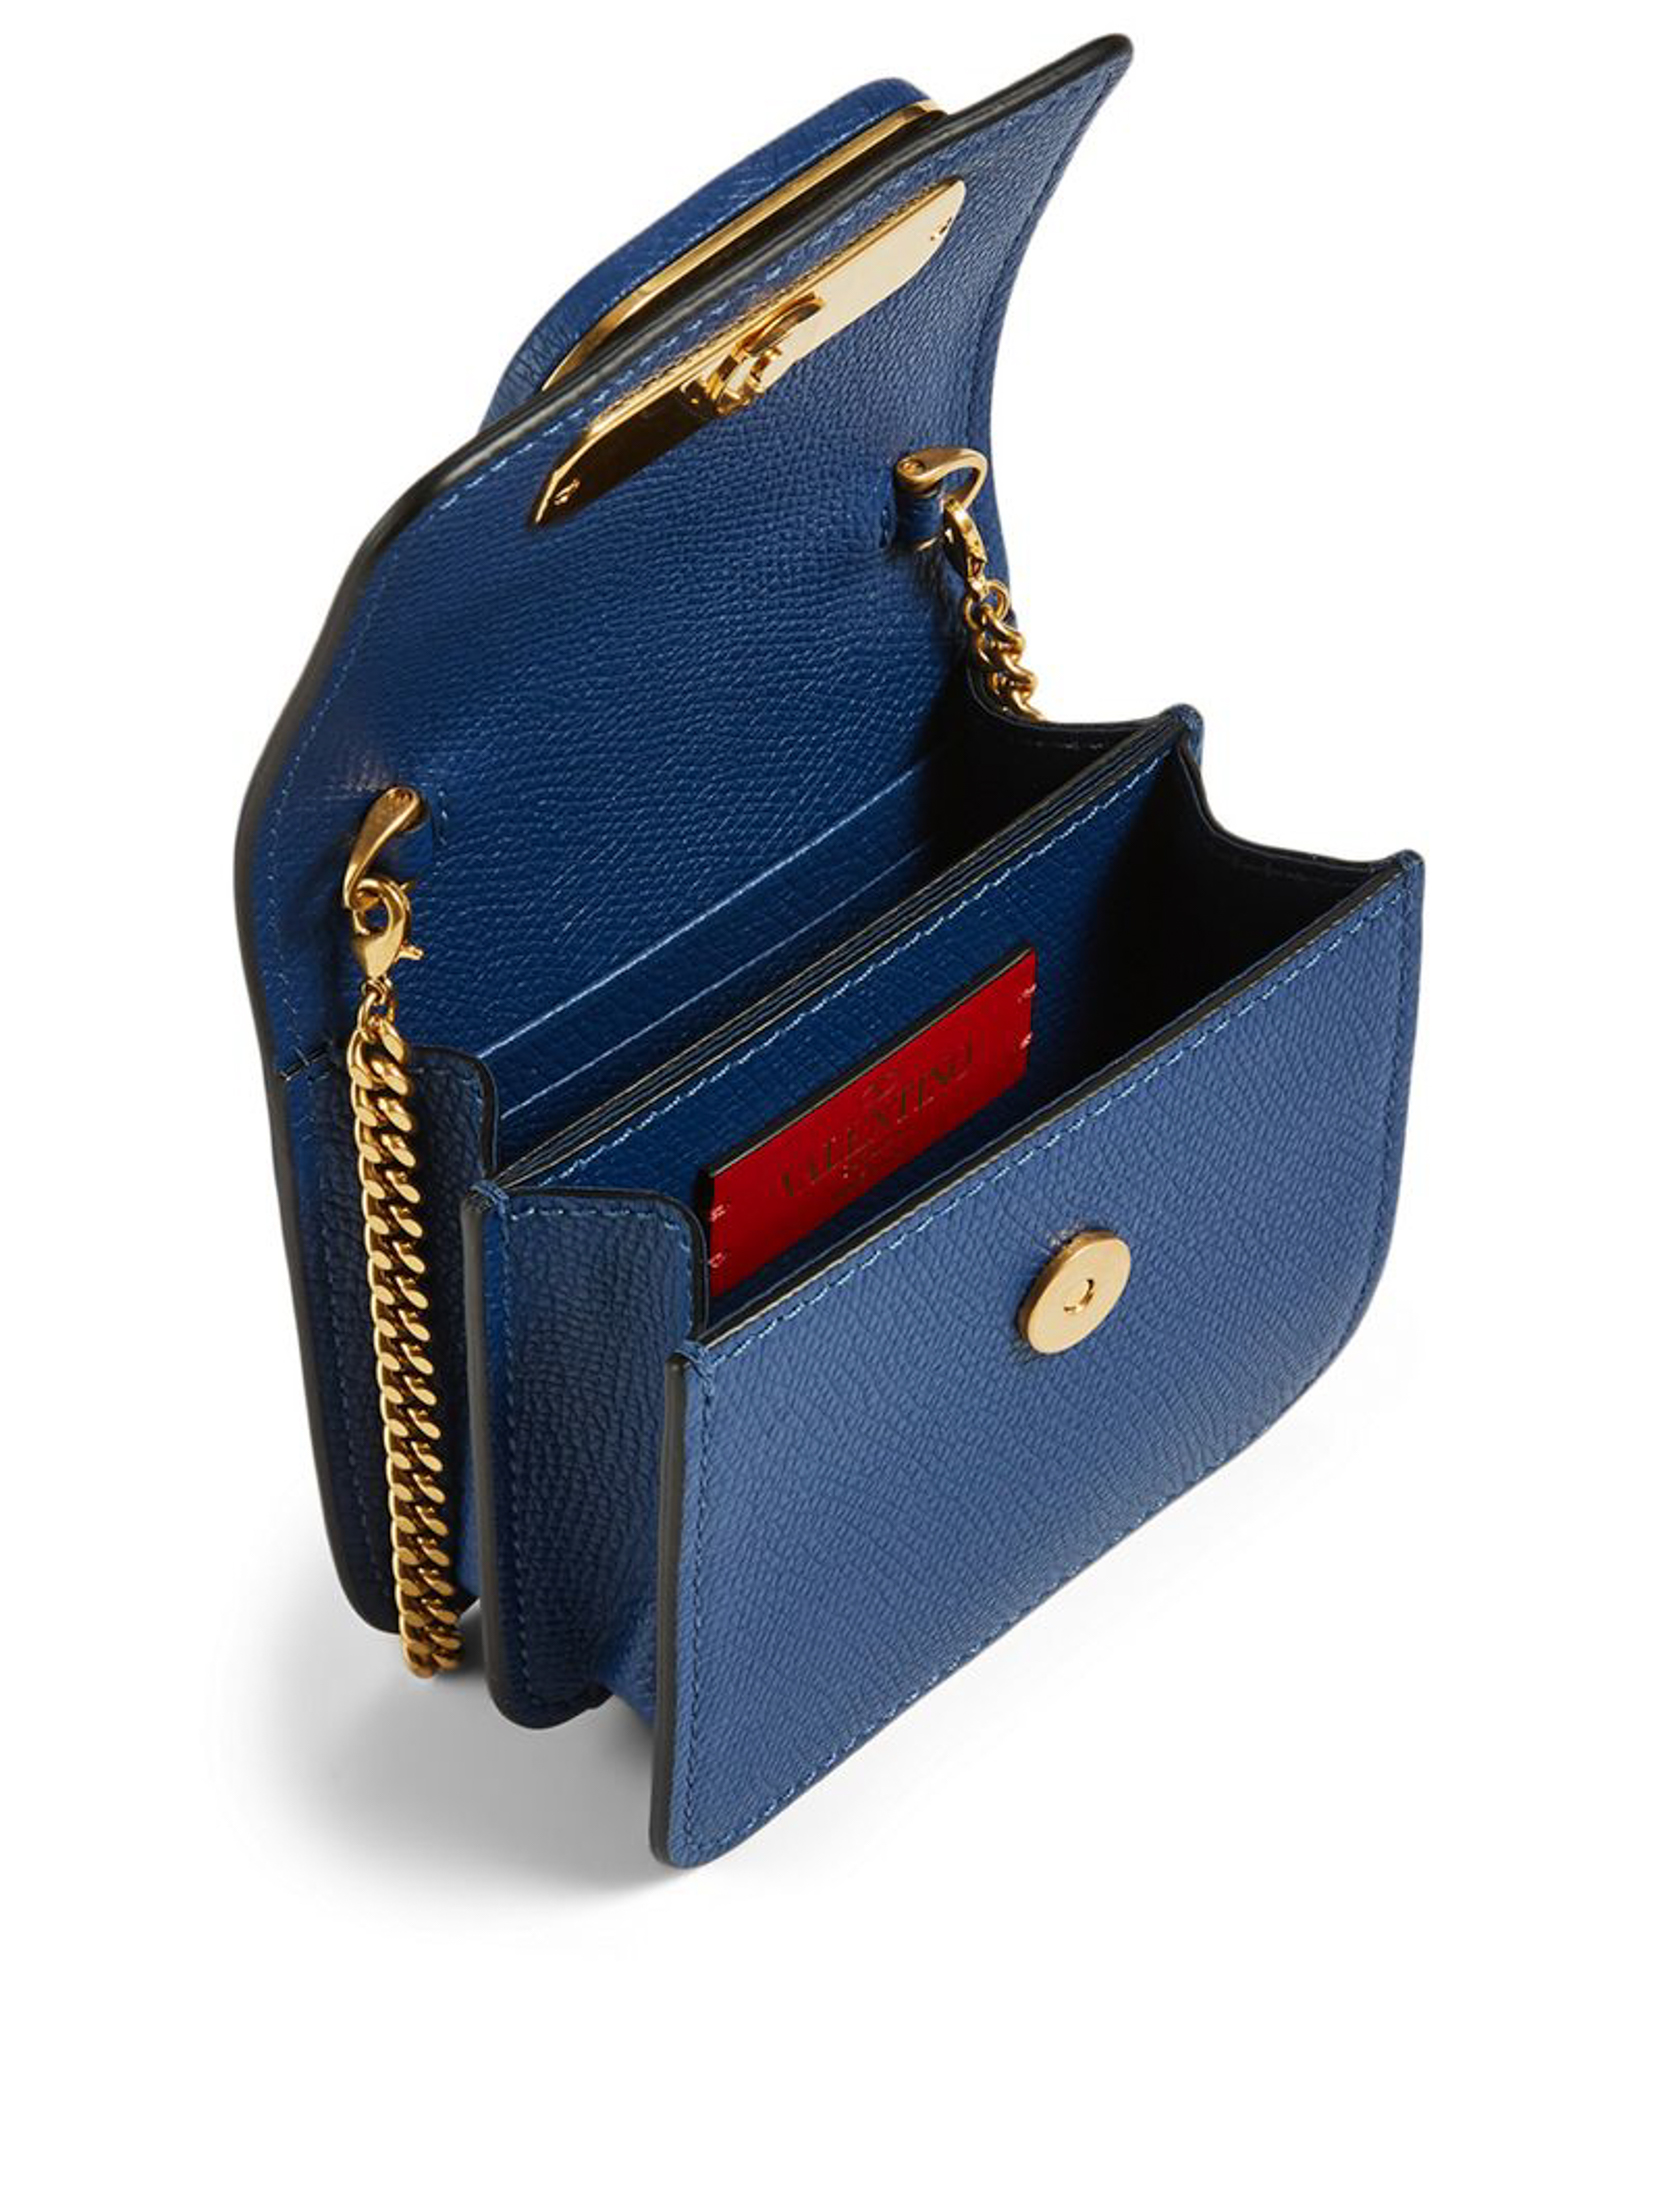 This Fall’s Handbags Are Elegantly Compact for a Pared-Down Season ...